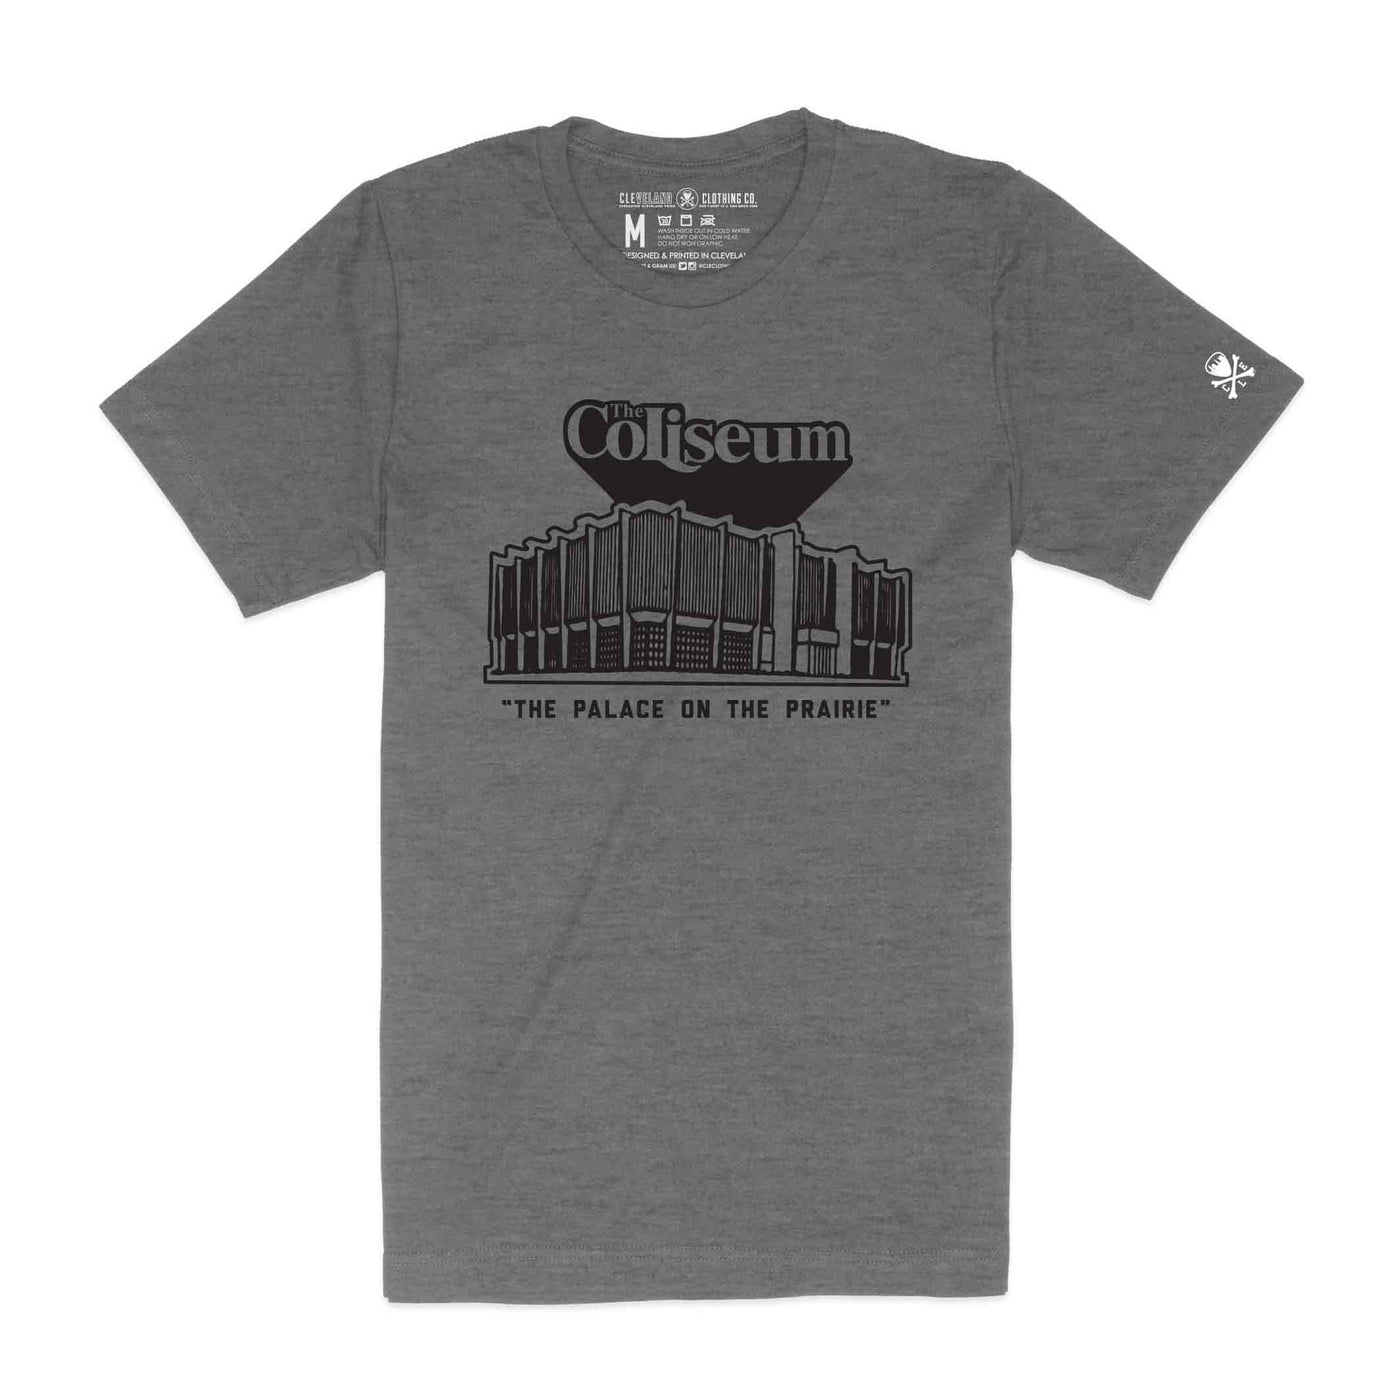 The Coliseum, the Palace on the Prairie - Unisex Crew T-Shirt